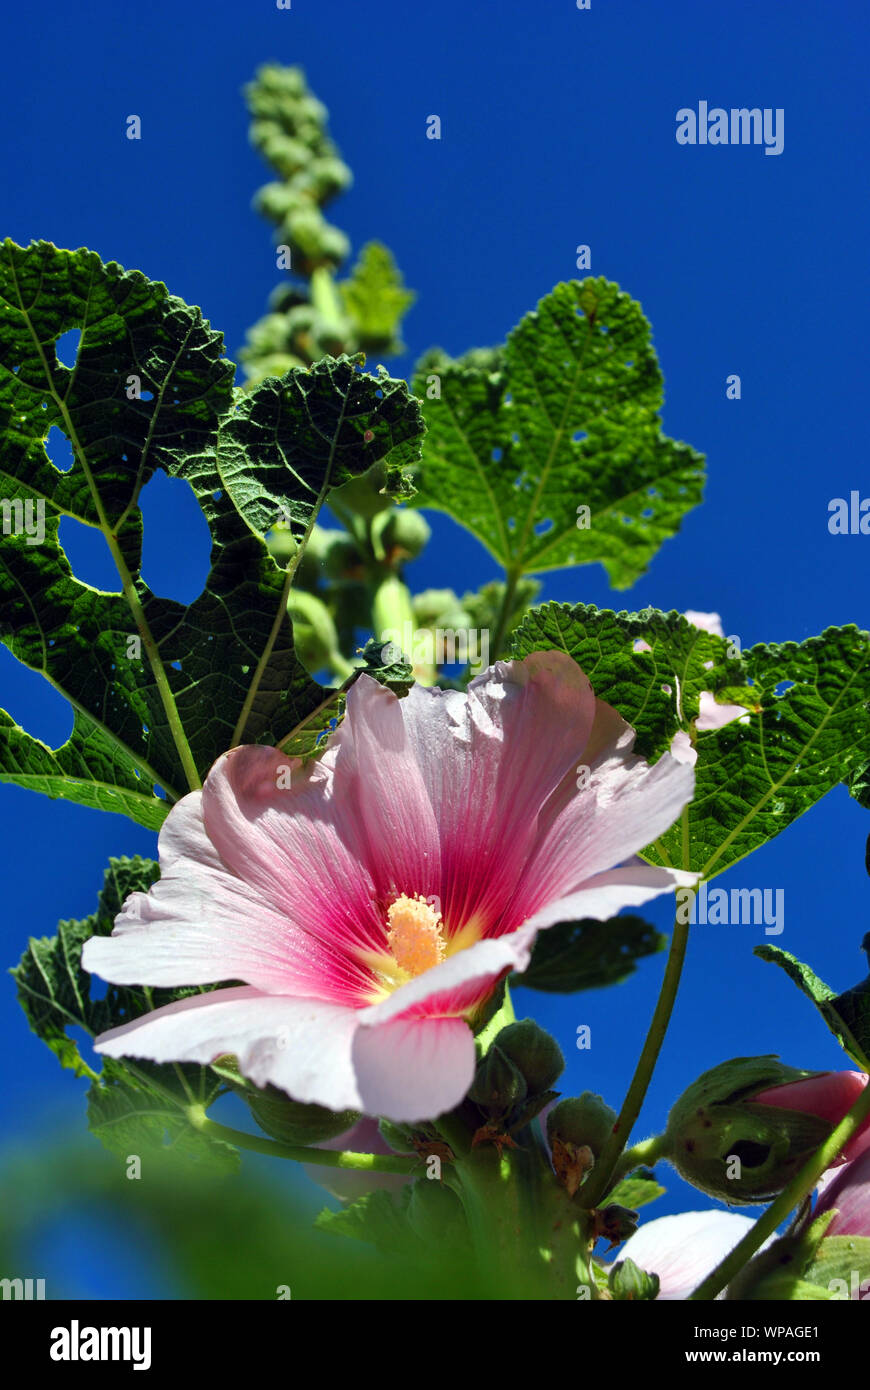 Soft pink Alcea rosea (common hollyhock, mallow flower) stem with green leaves and buds, blue sky background, view on top Stock Photo